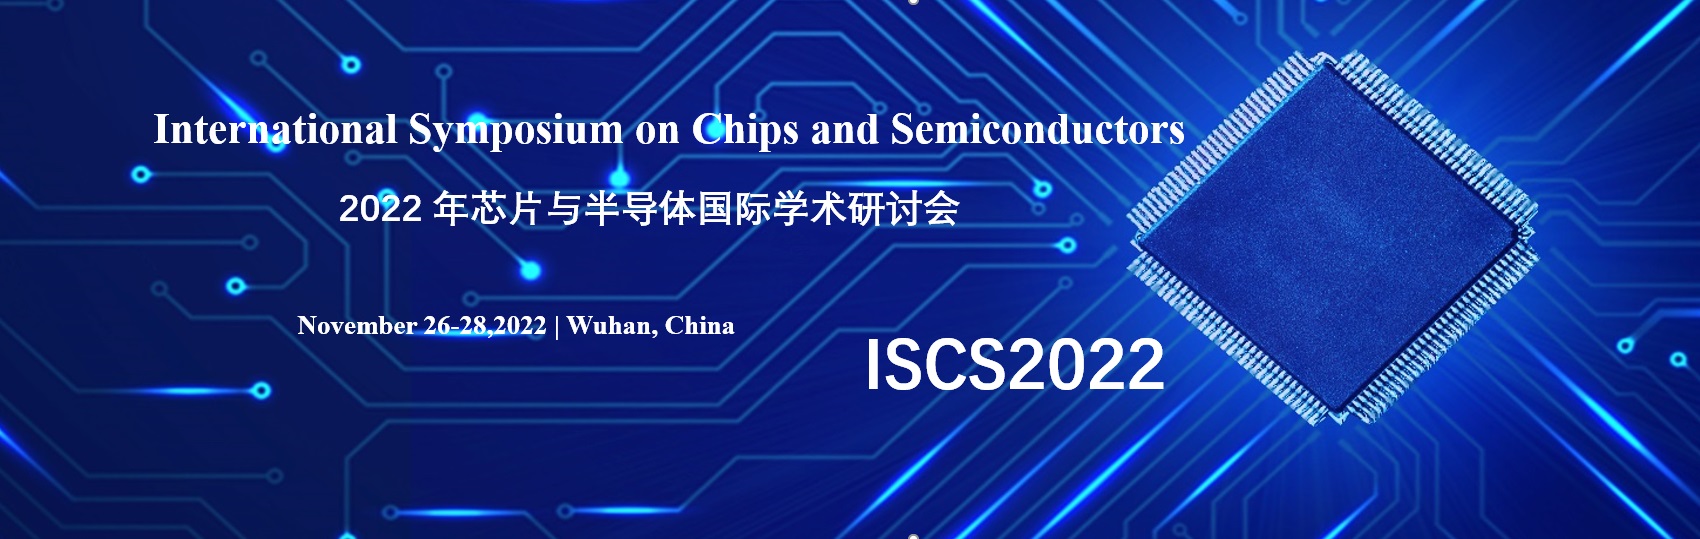 International Symposium on Chips and Semiconductors